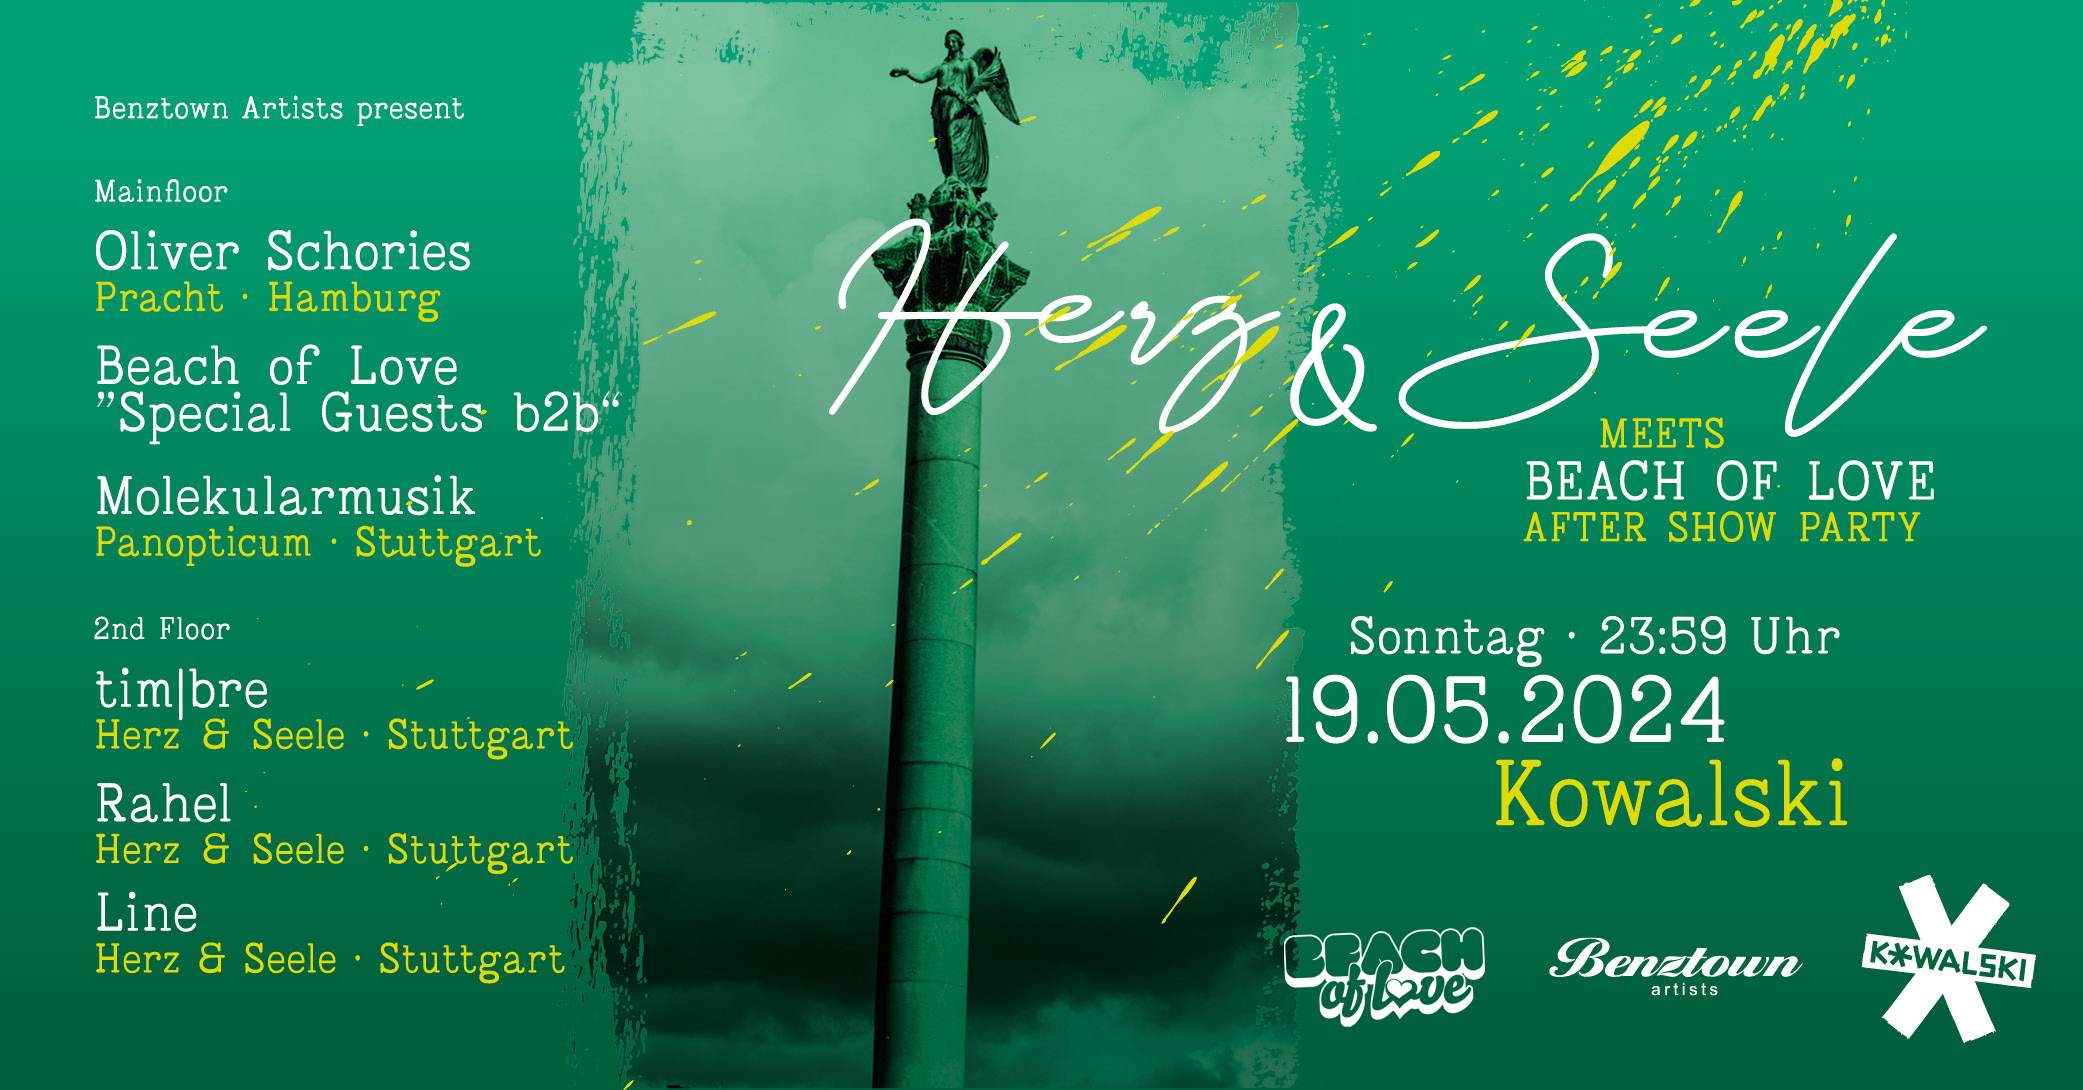 Herz & Seele meets Beach of Love - After Show Party - Página frontal